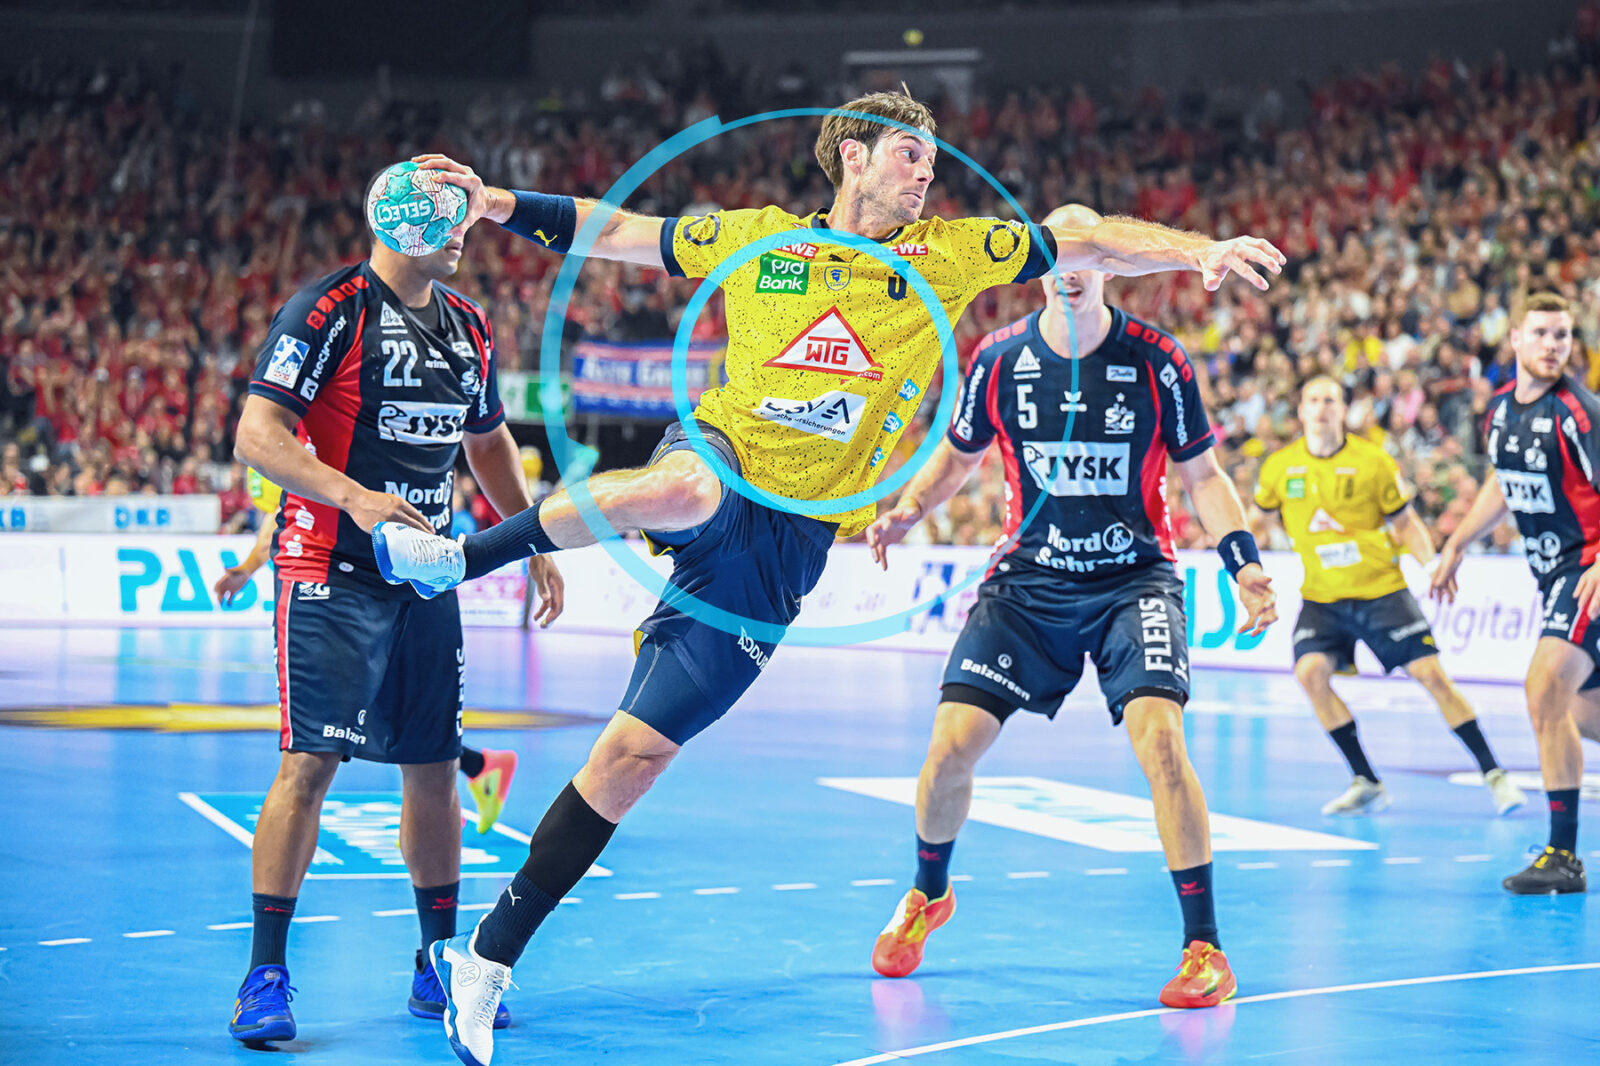 A team handball player leaps into the air to take a shot while wearing a player tracker that his coach is using to monitor his load management.